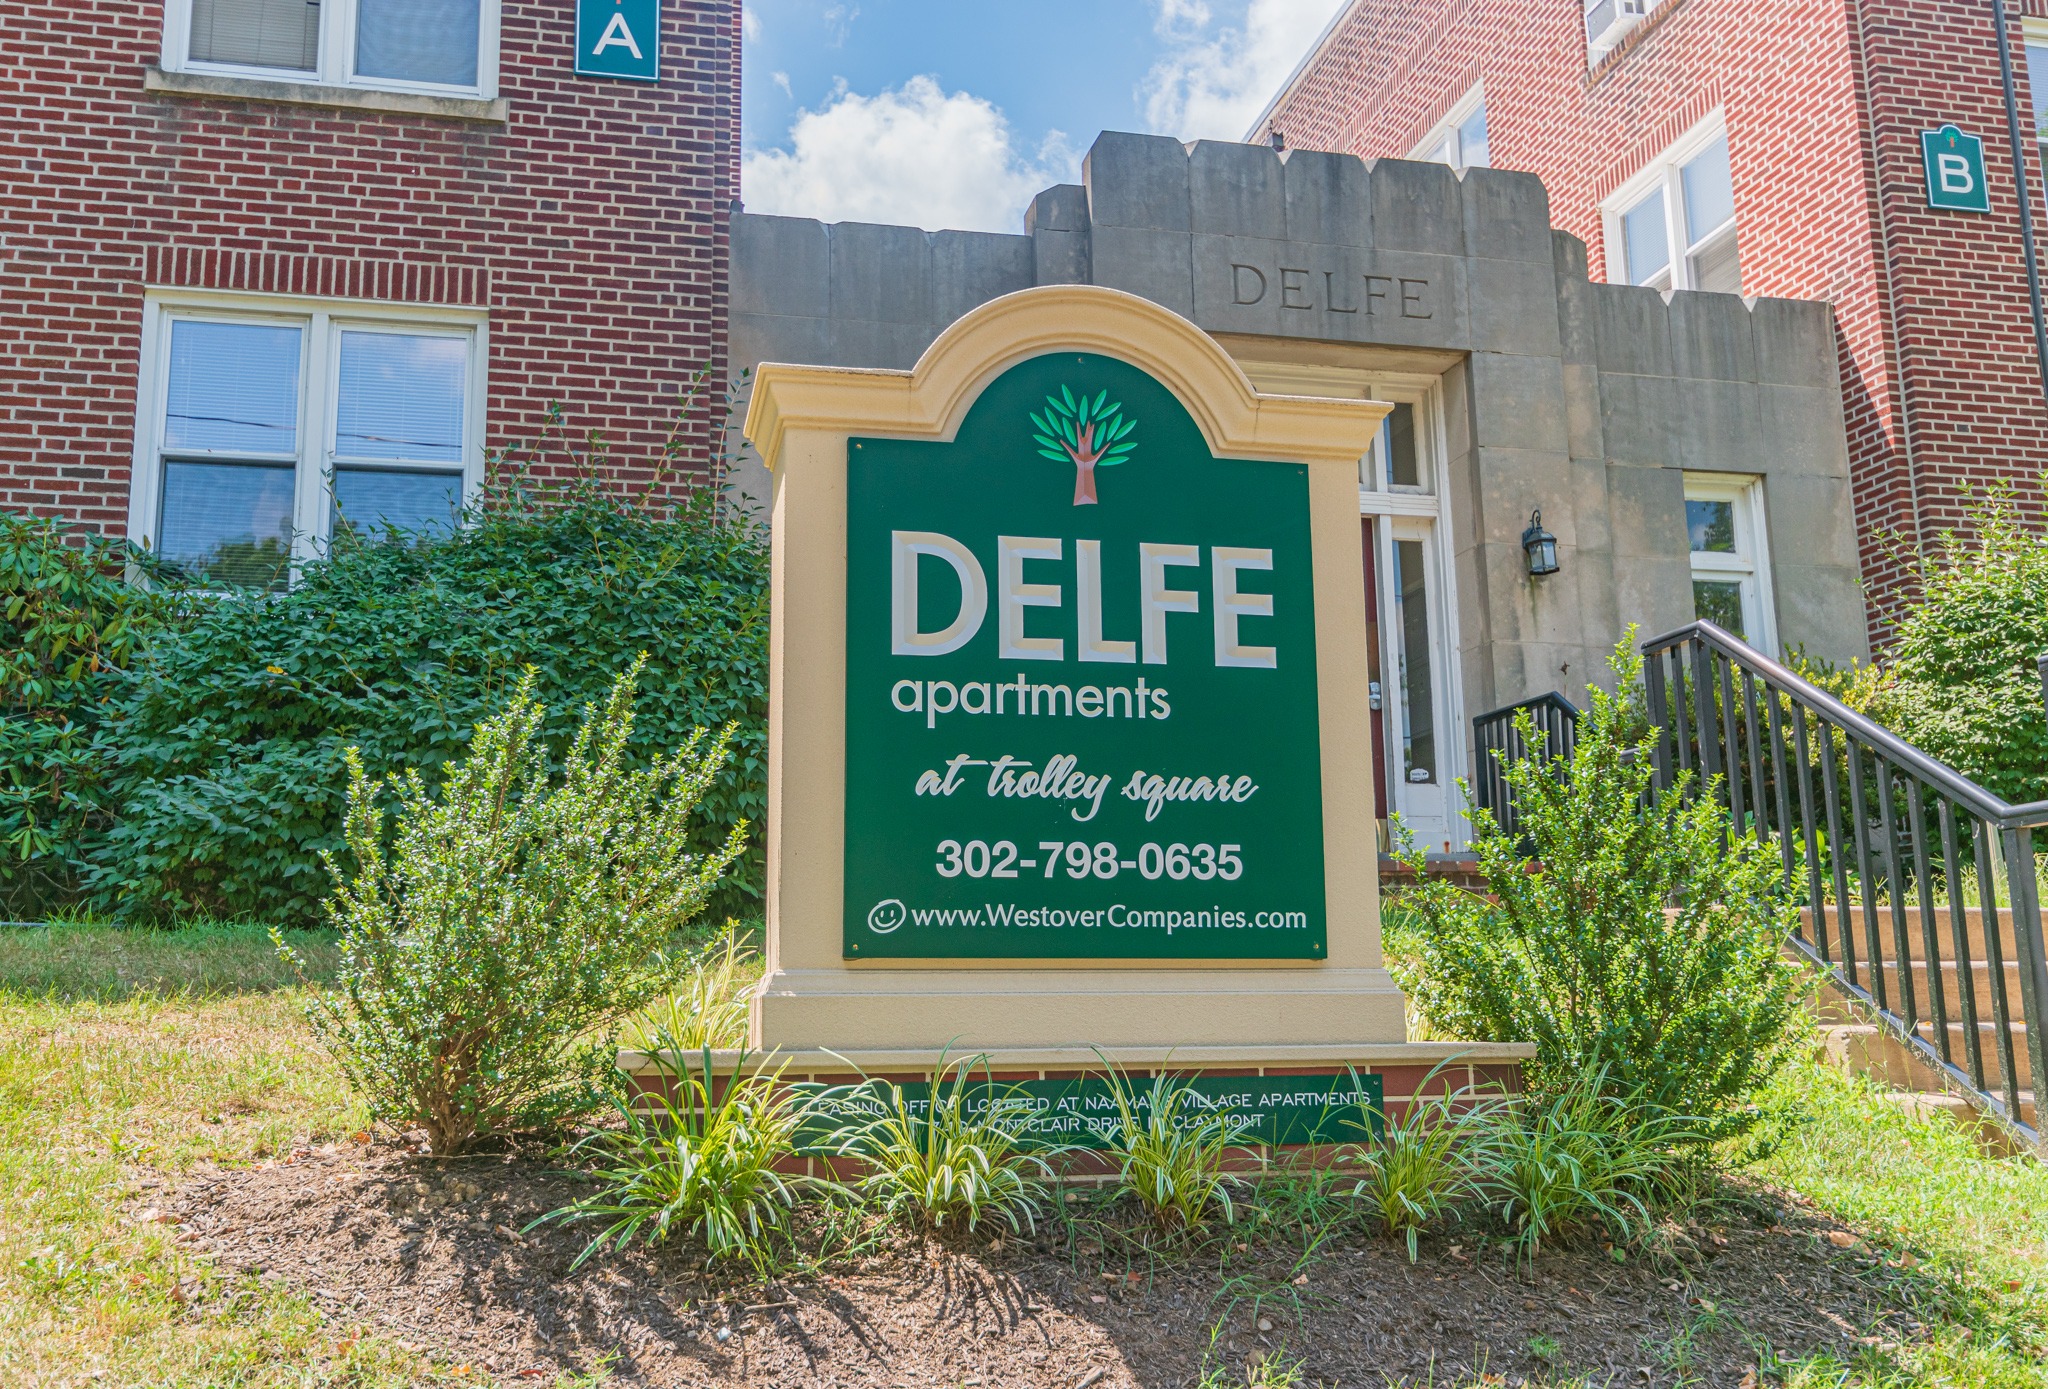 Delfe apartments welcome sign, fitted in a beautiful garden